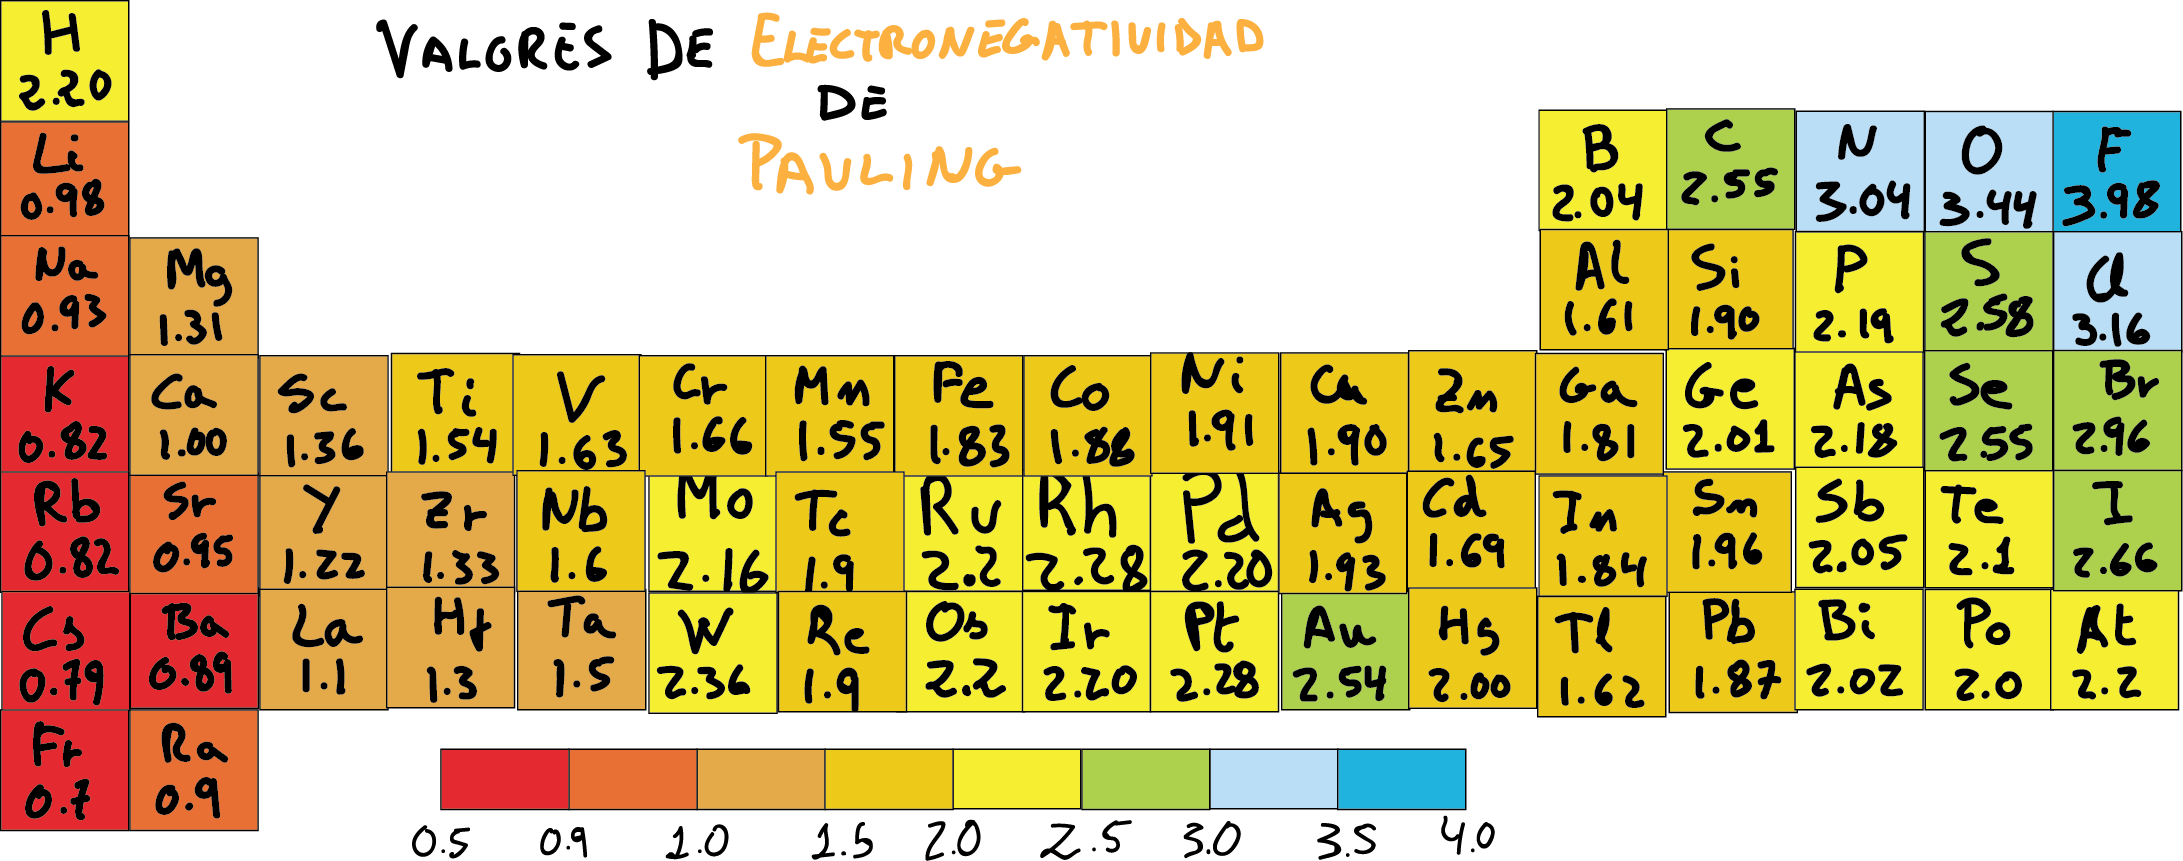 table of electronegativity Pauling - electronegativity chart